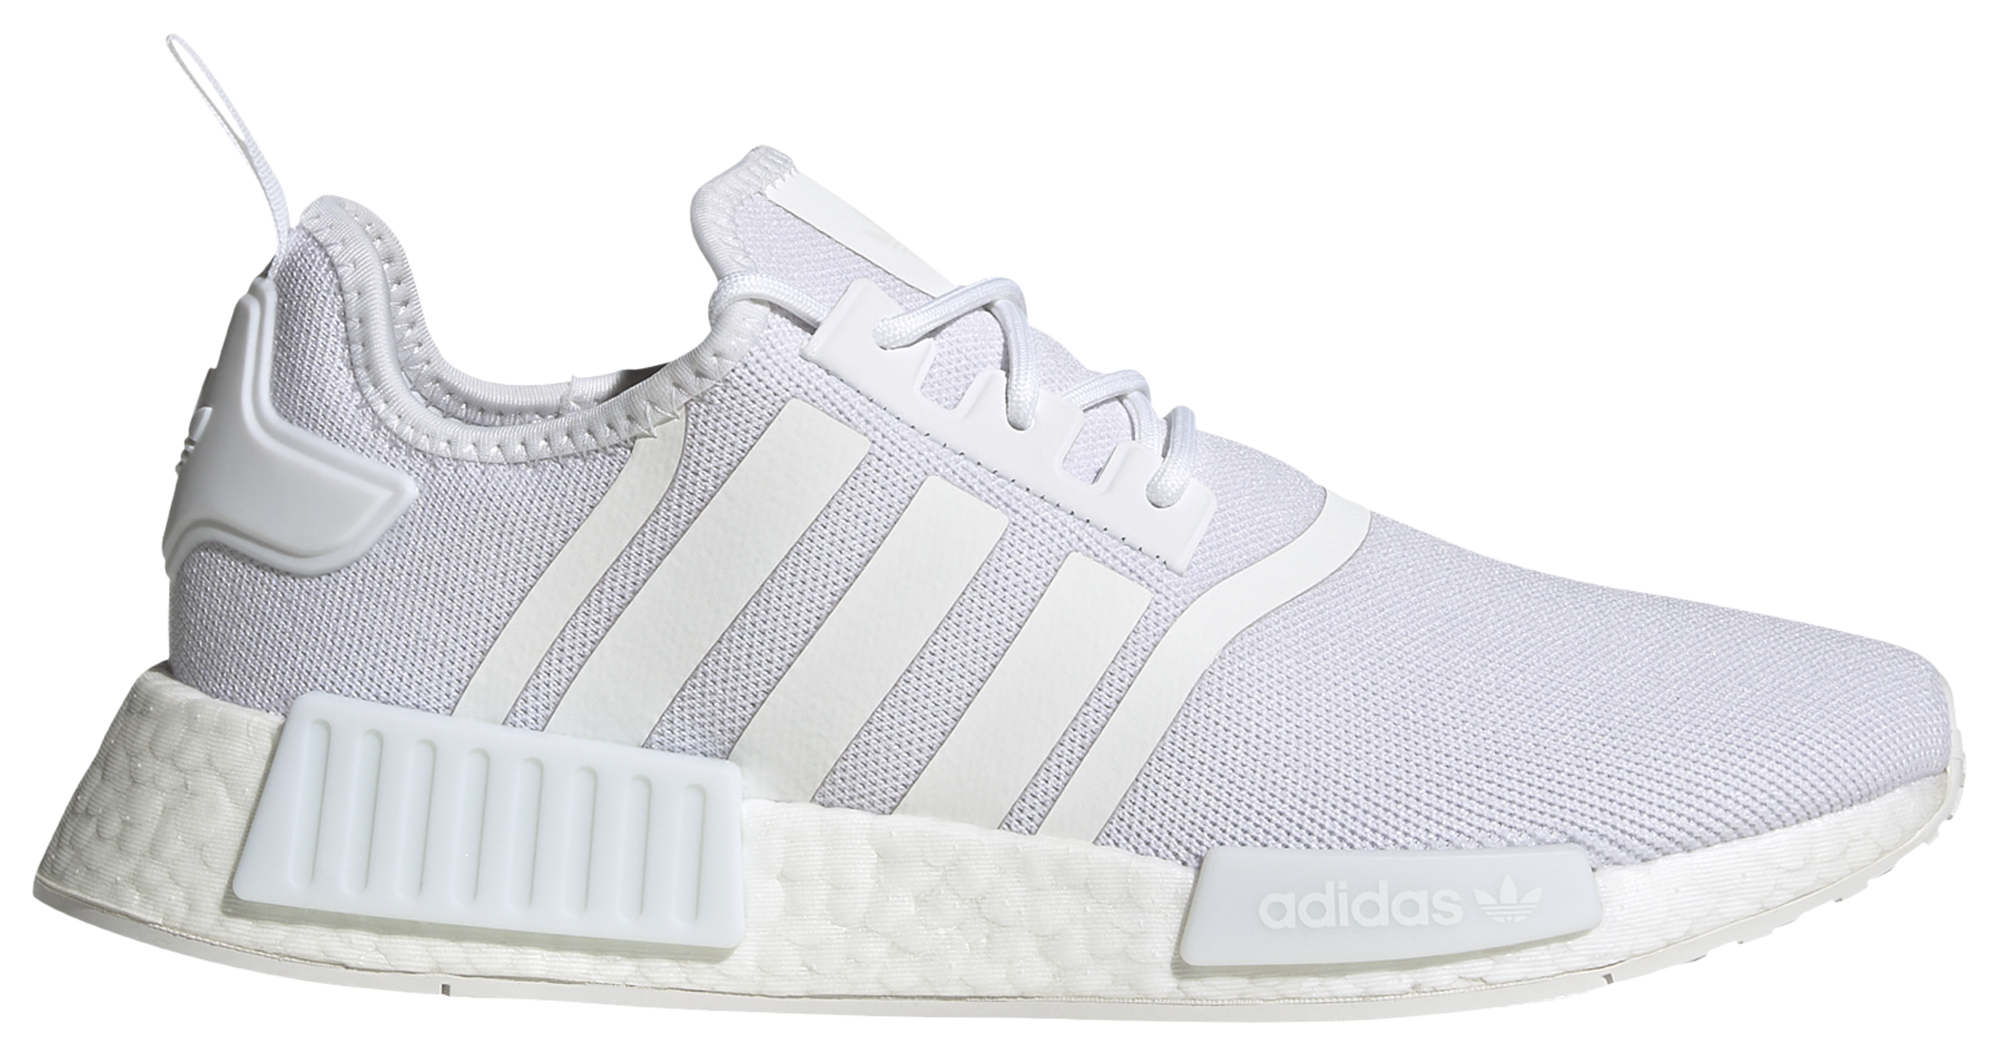 Panprices - adidas NMD R1 V2 - Men Shoes White Size 40 2/3 at Foot Locker